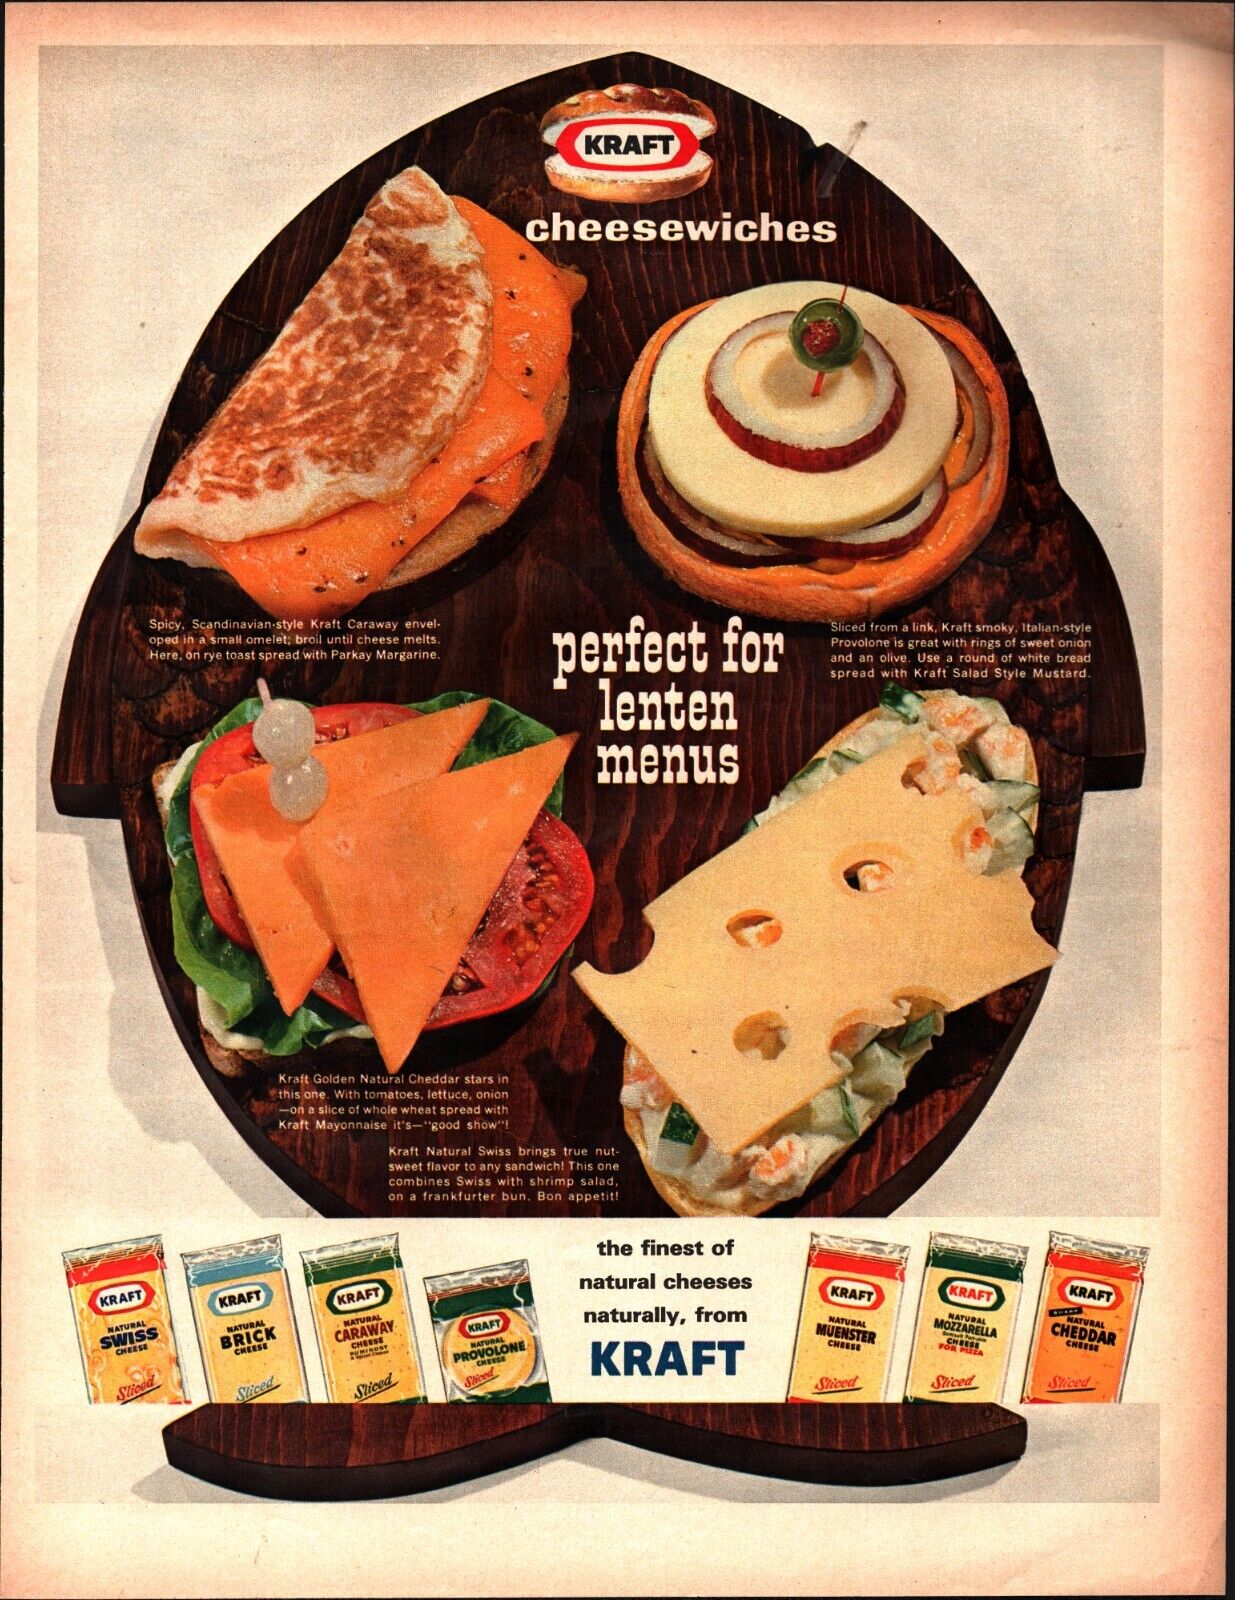 1964 Kraft Cheesewiches Vintage Print Ad 1960s Perfect for leten menu c1